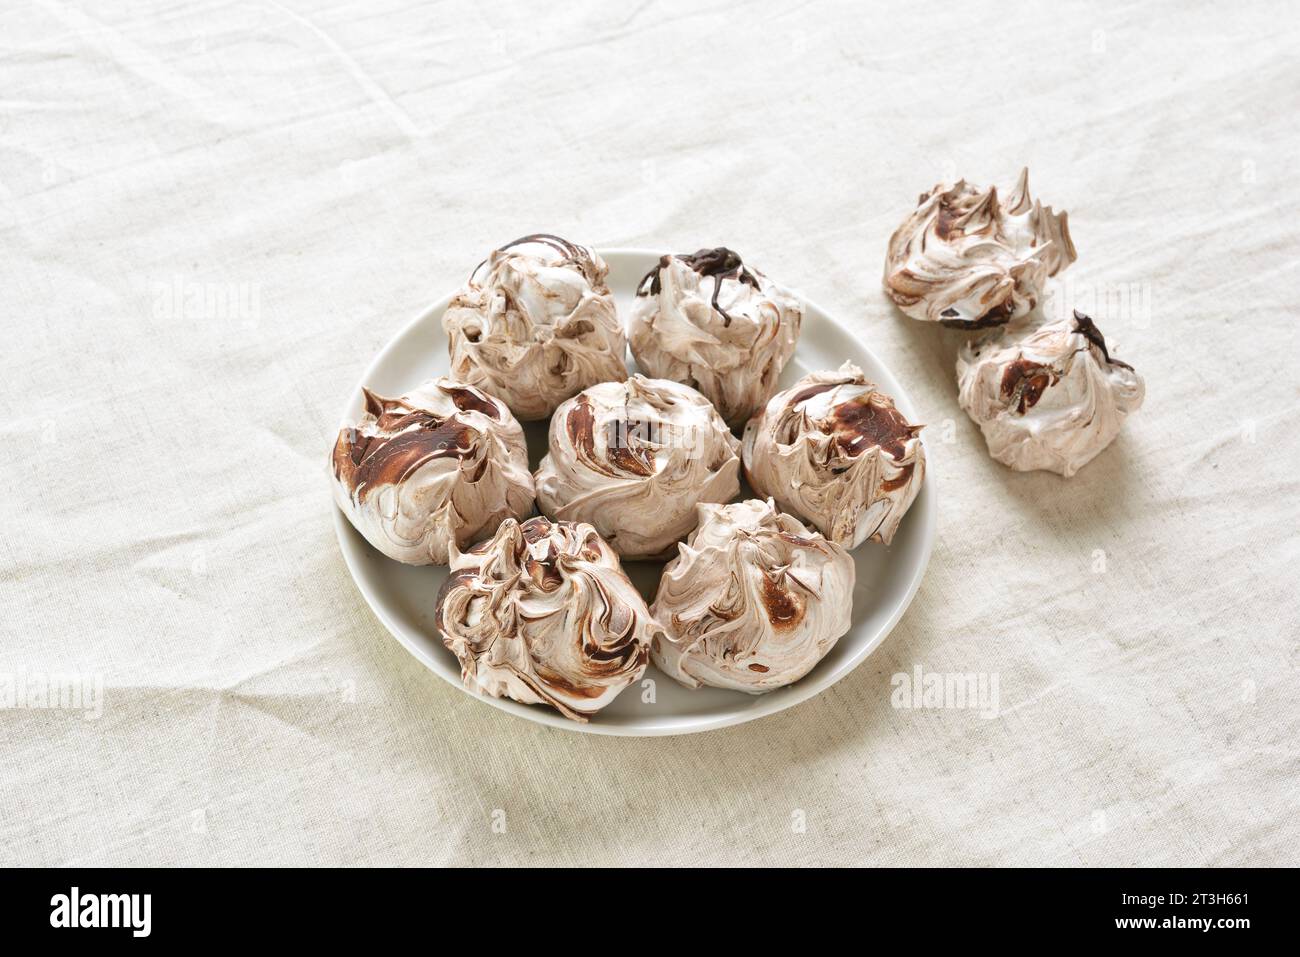 Chocolate meringue cookies on plate over light background. Close up view Stock Photo